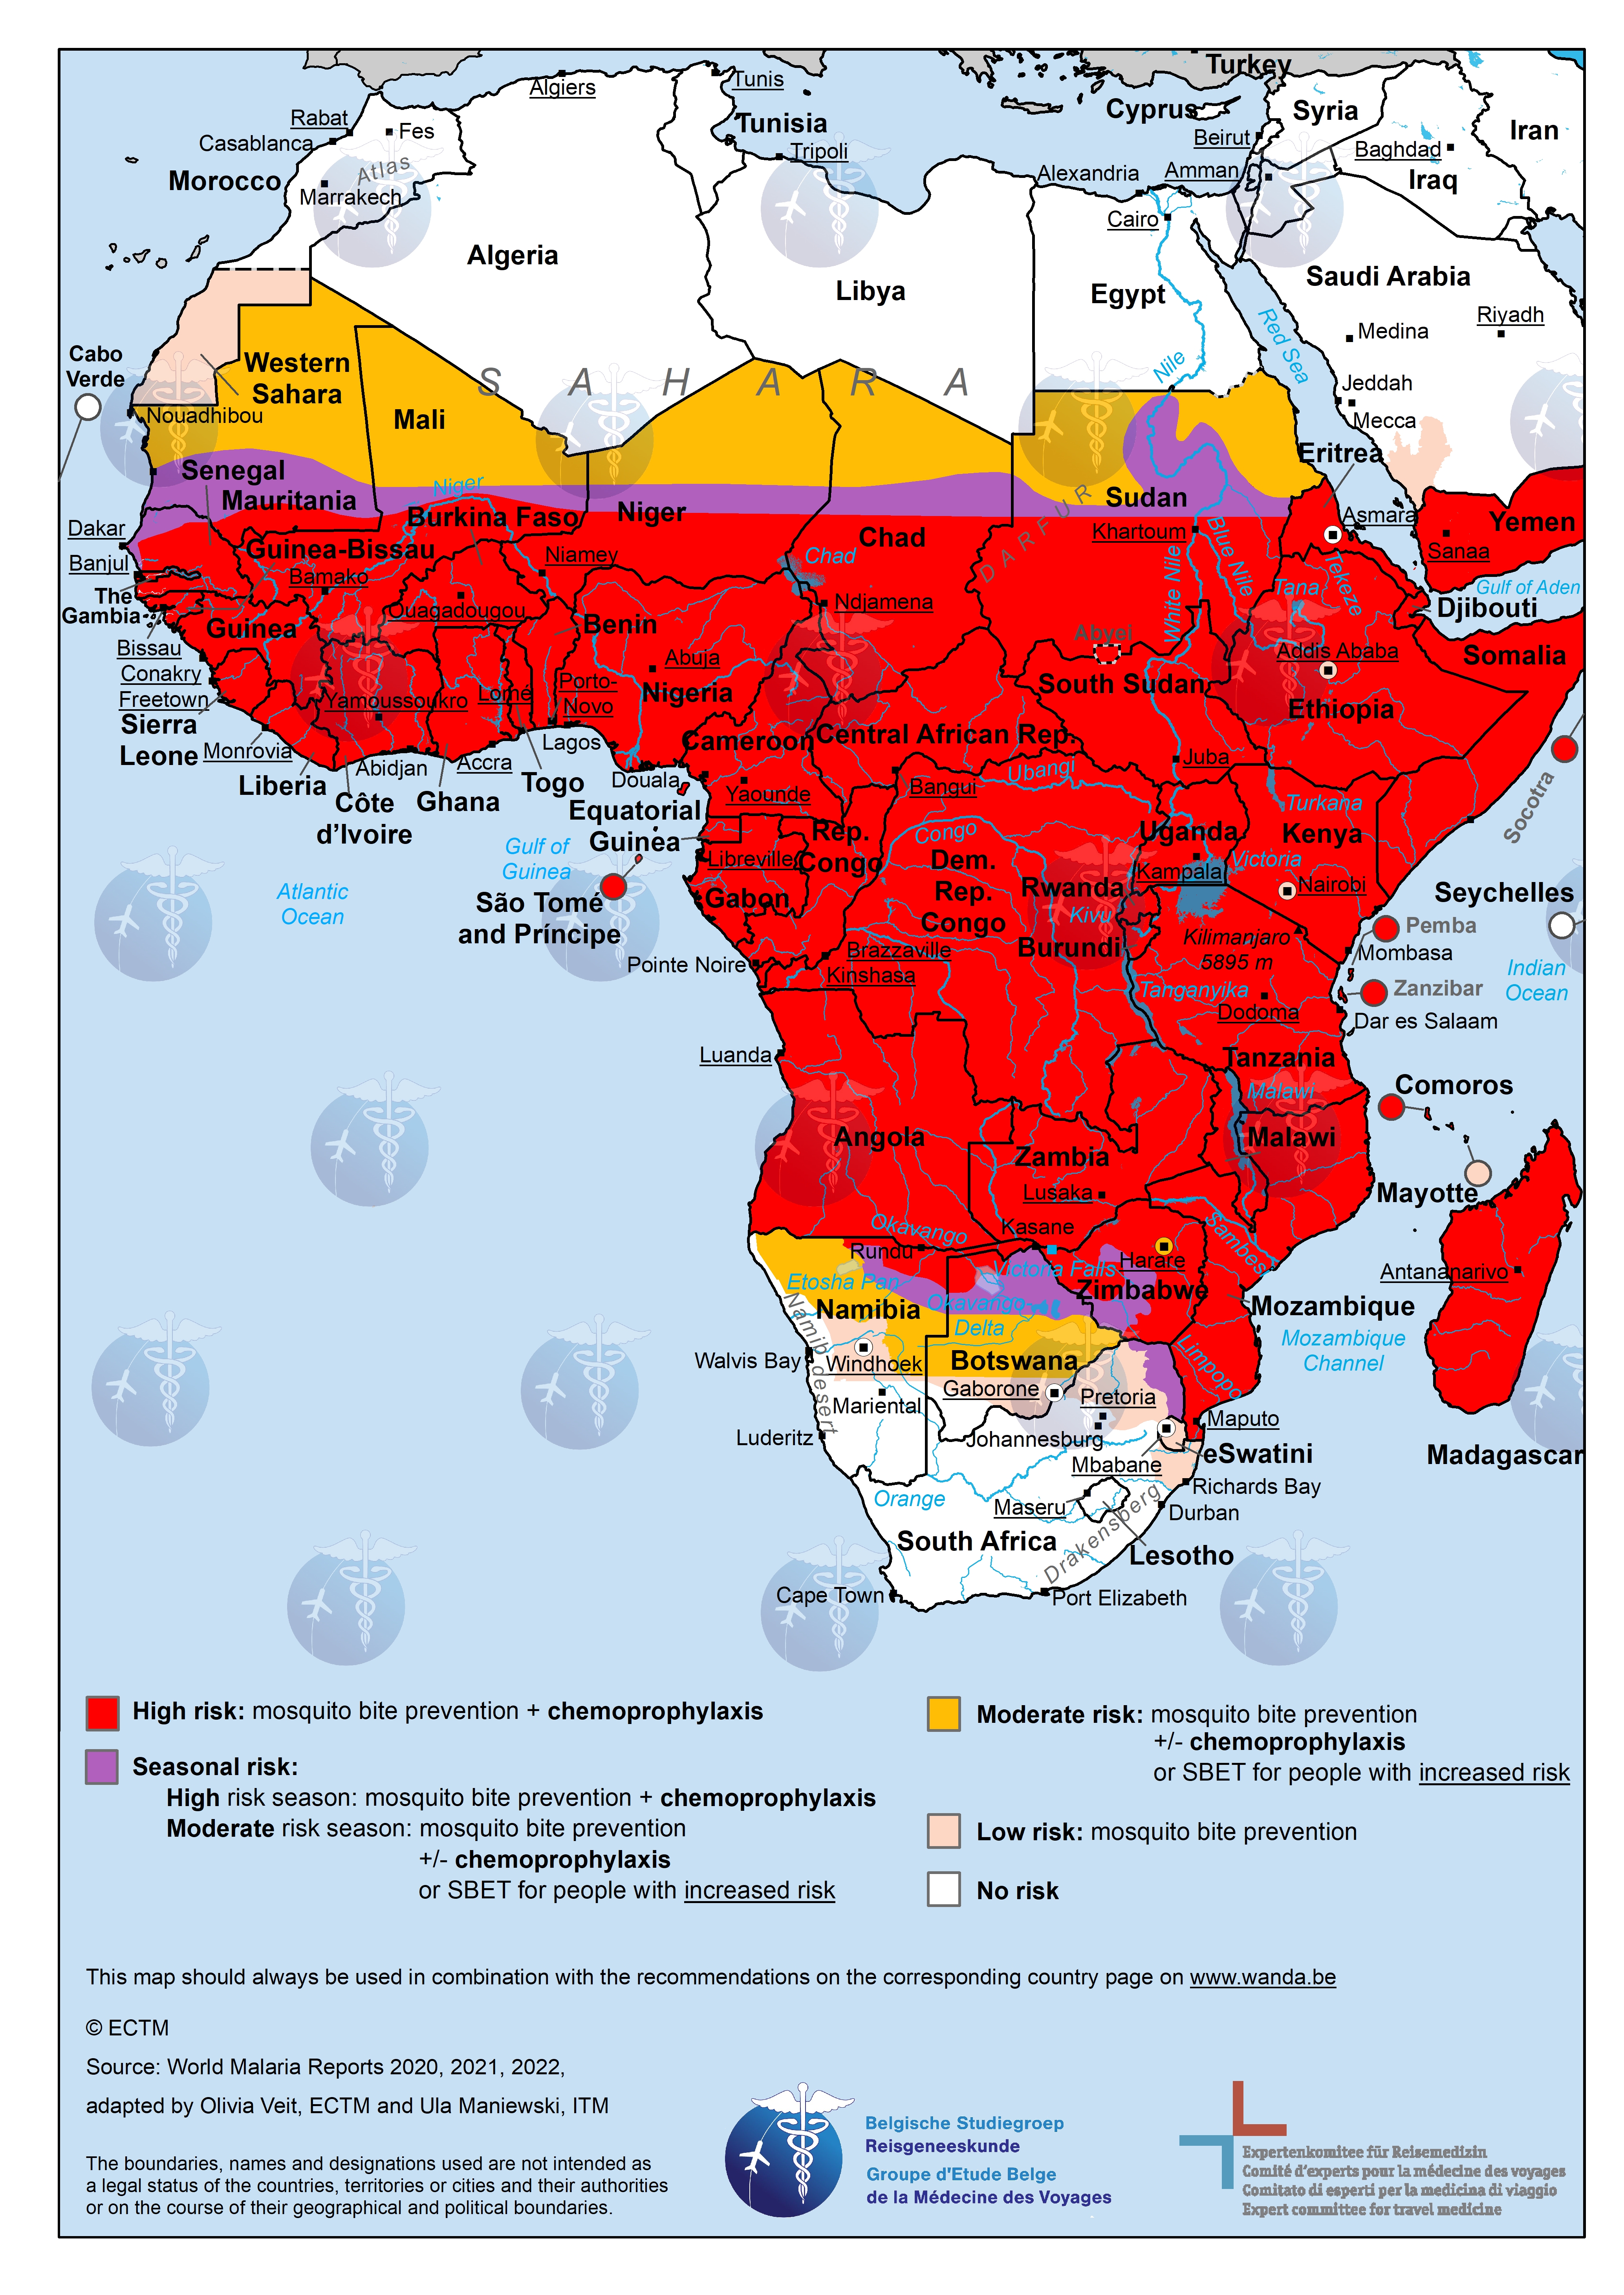 Map of Africa with malaria risk areas